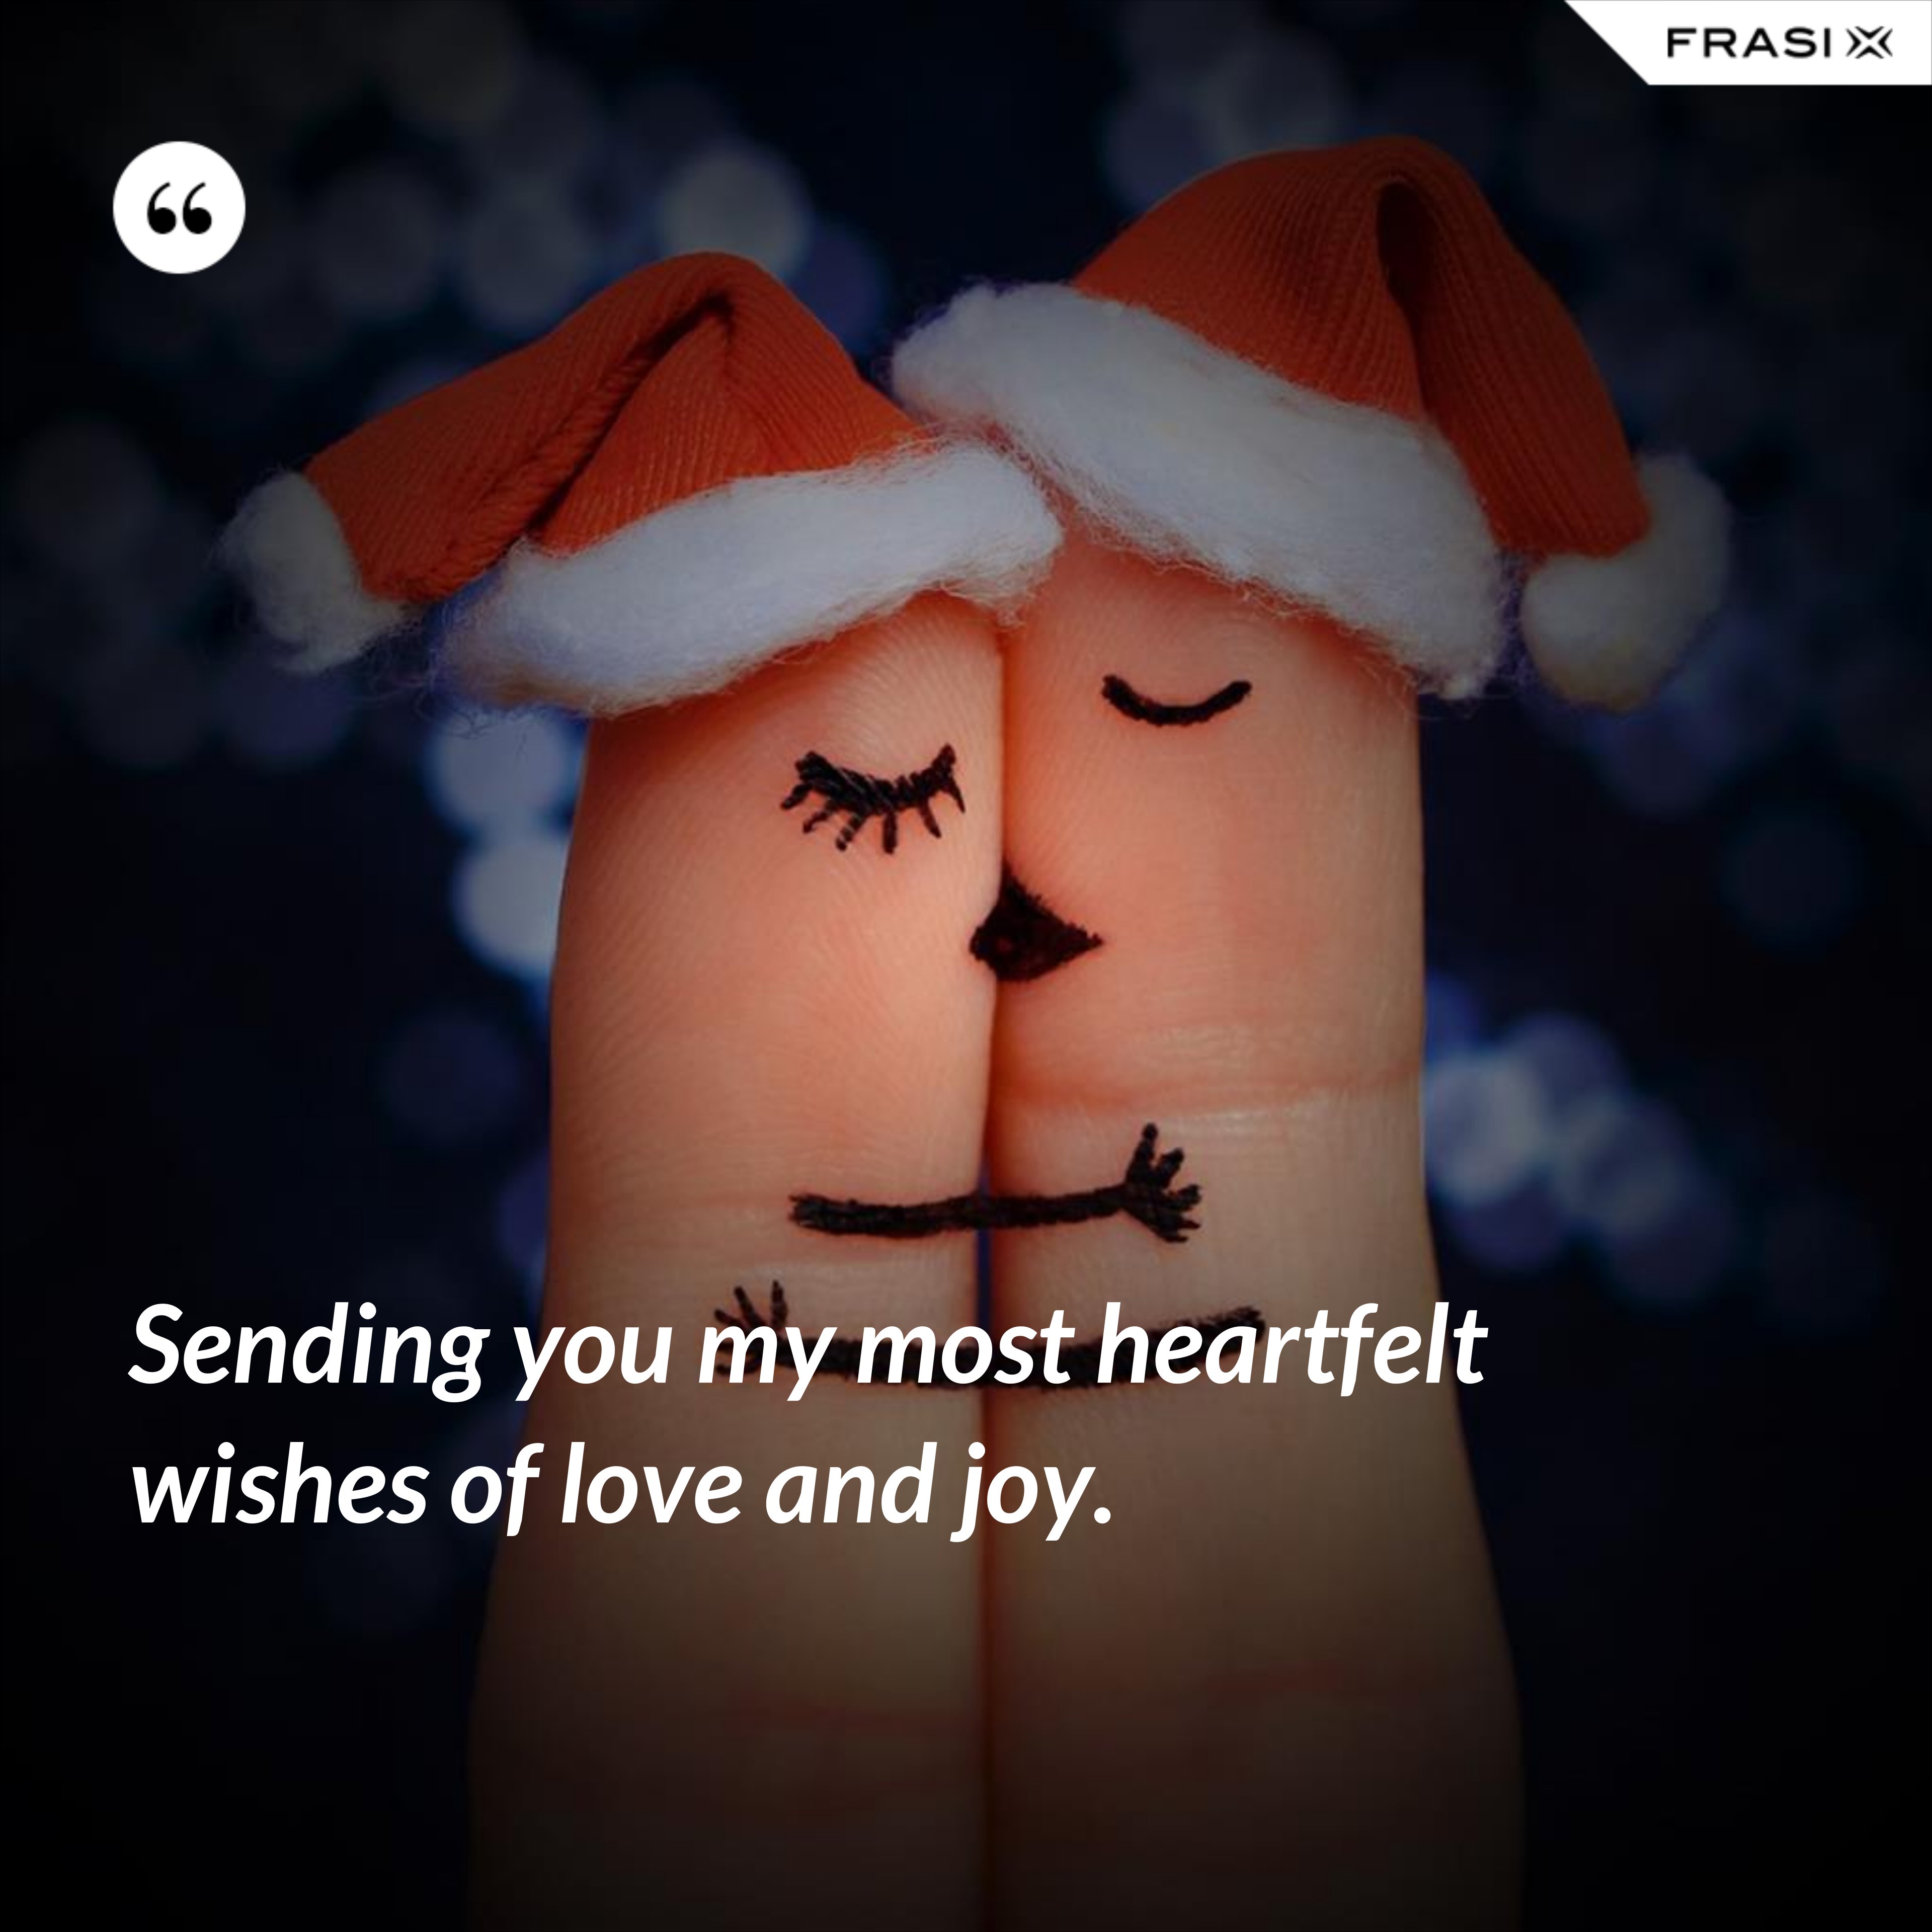 Sending you my most heartfelt wishes of love and joy. - Anonimo